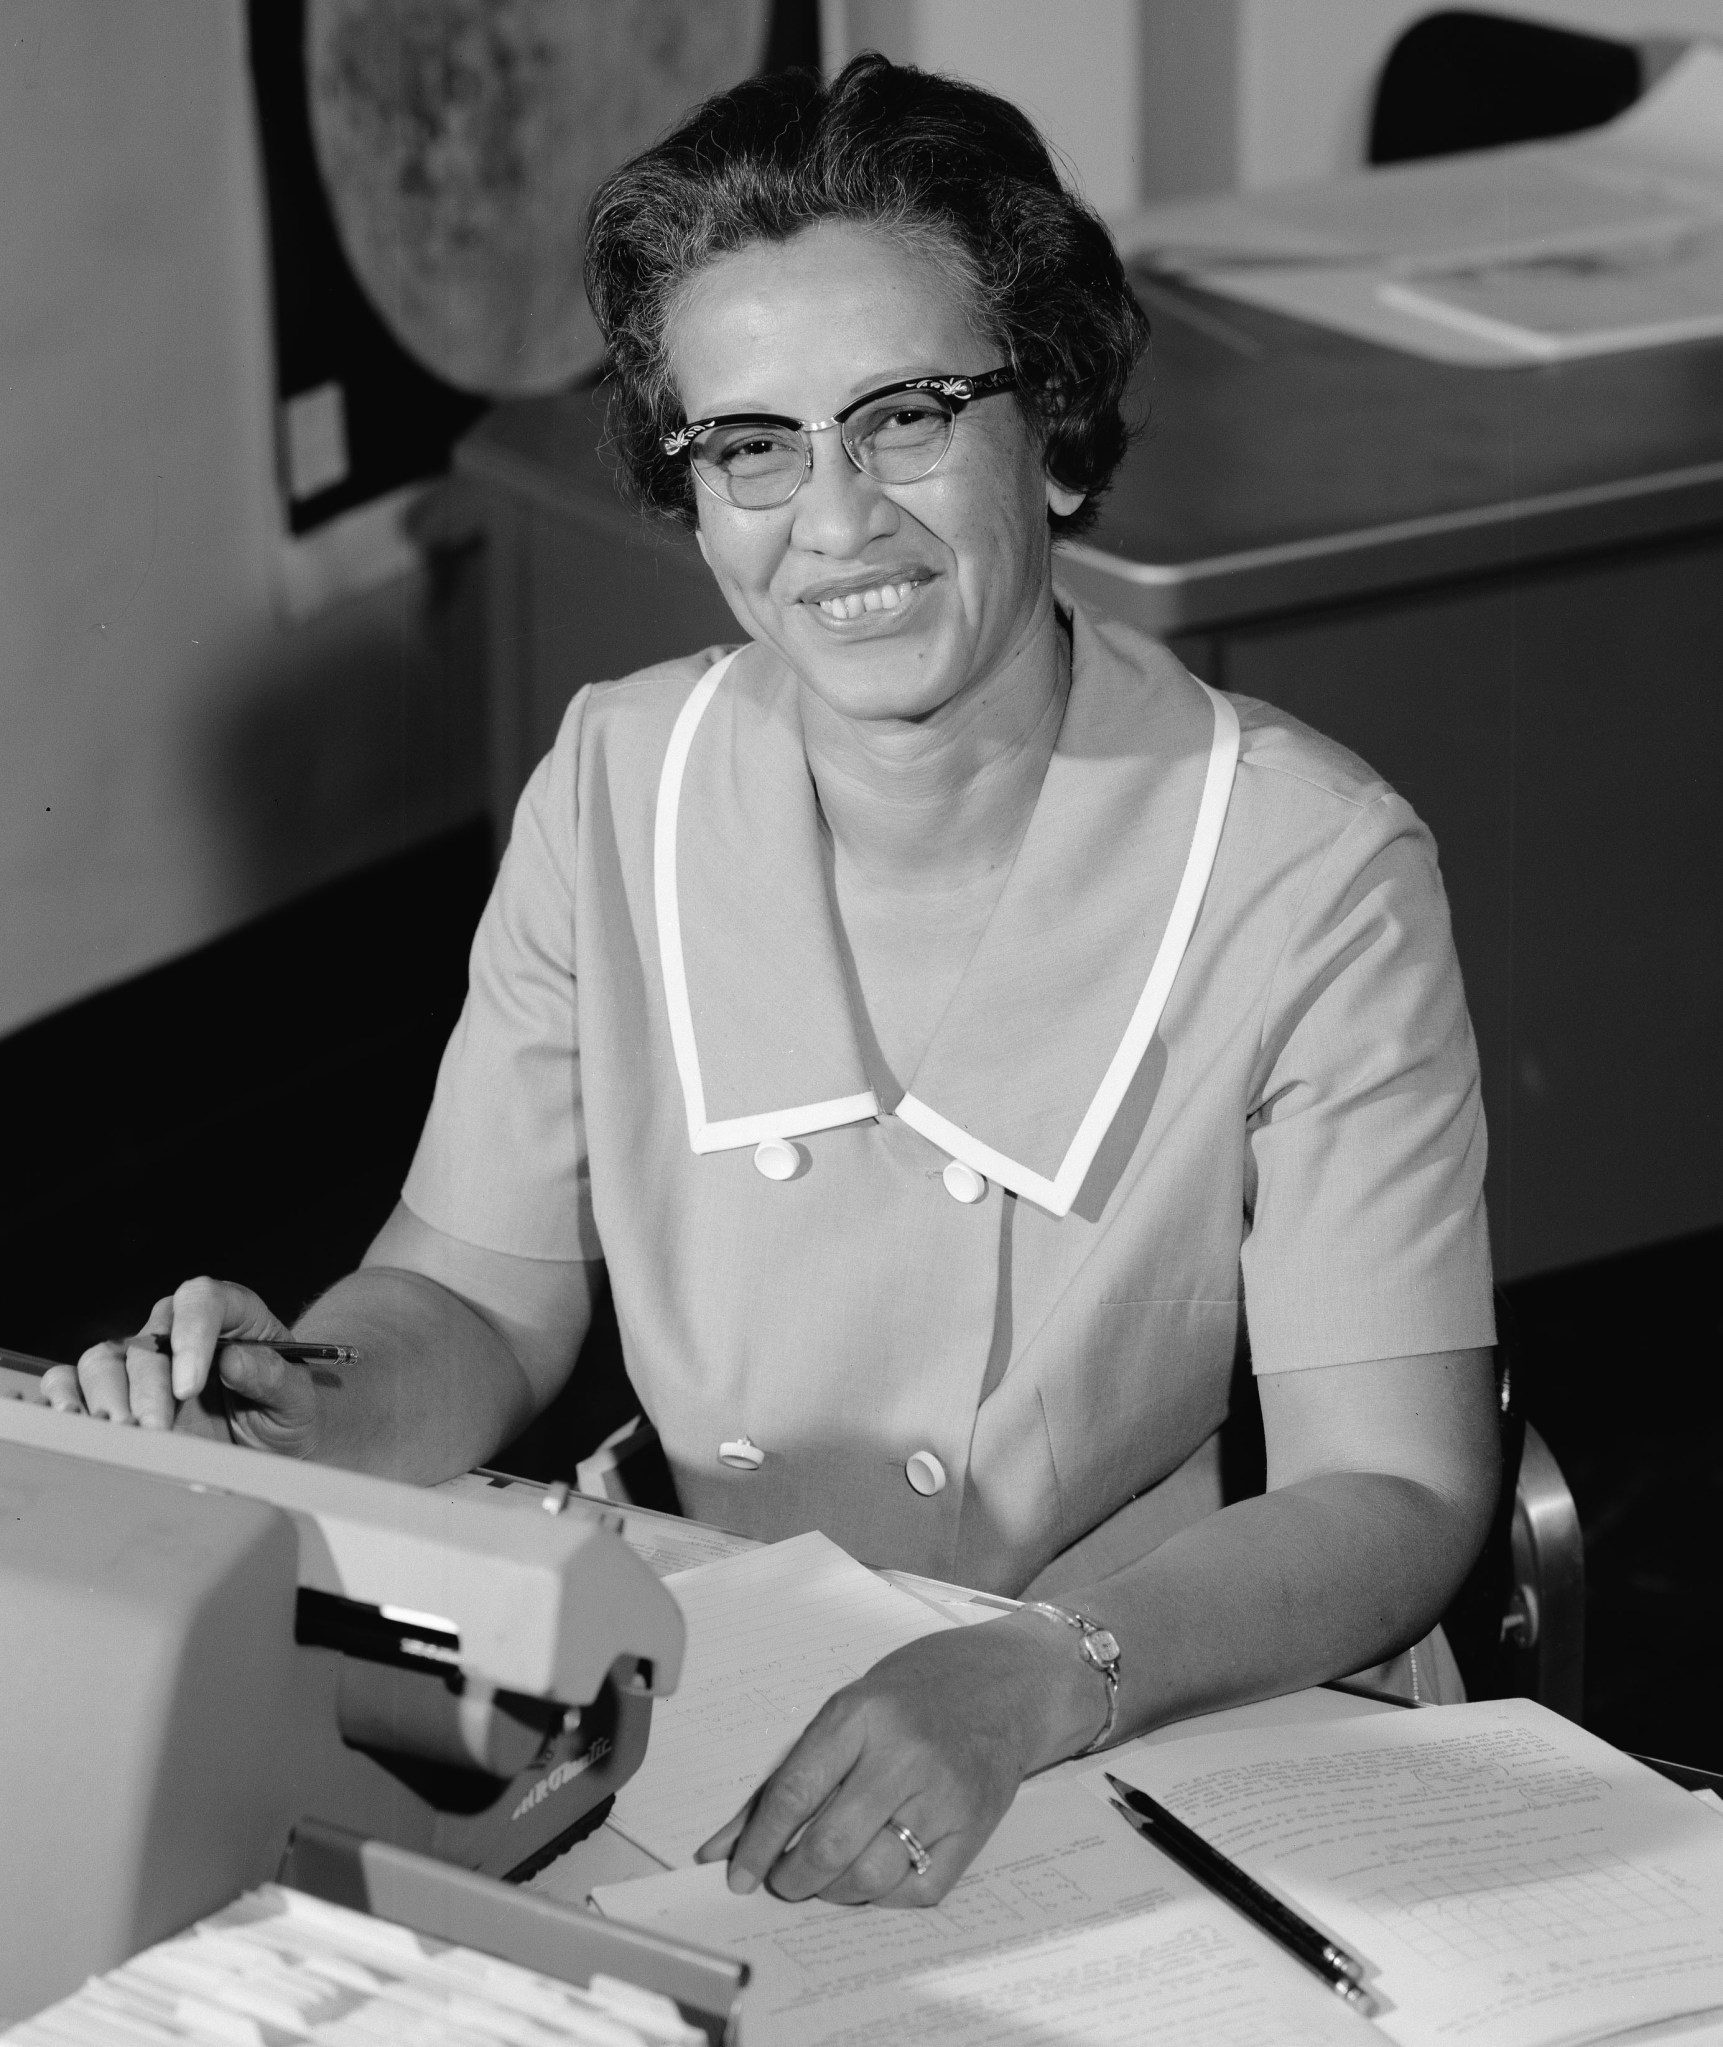 This is a photo of NASA mathematician Katherine Johnson sitting at a desk.